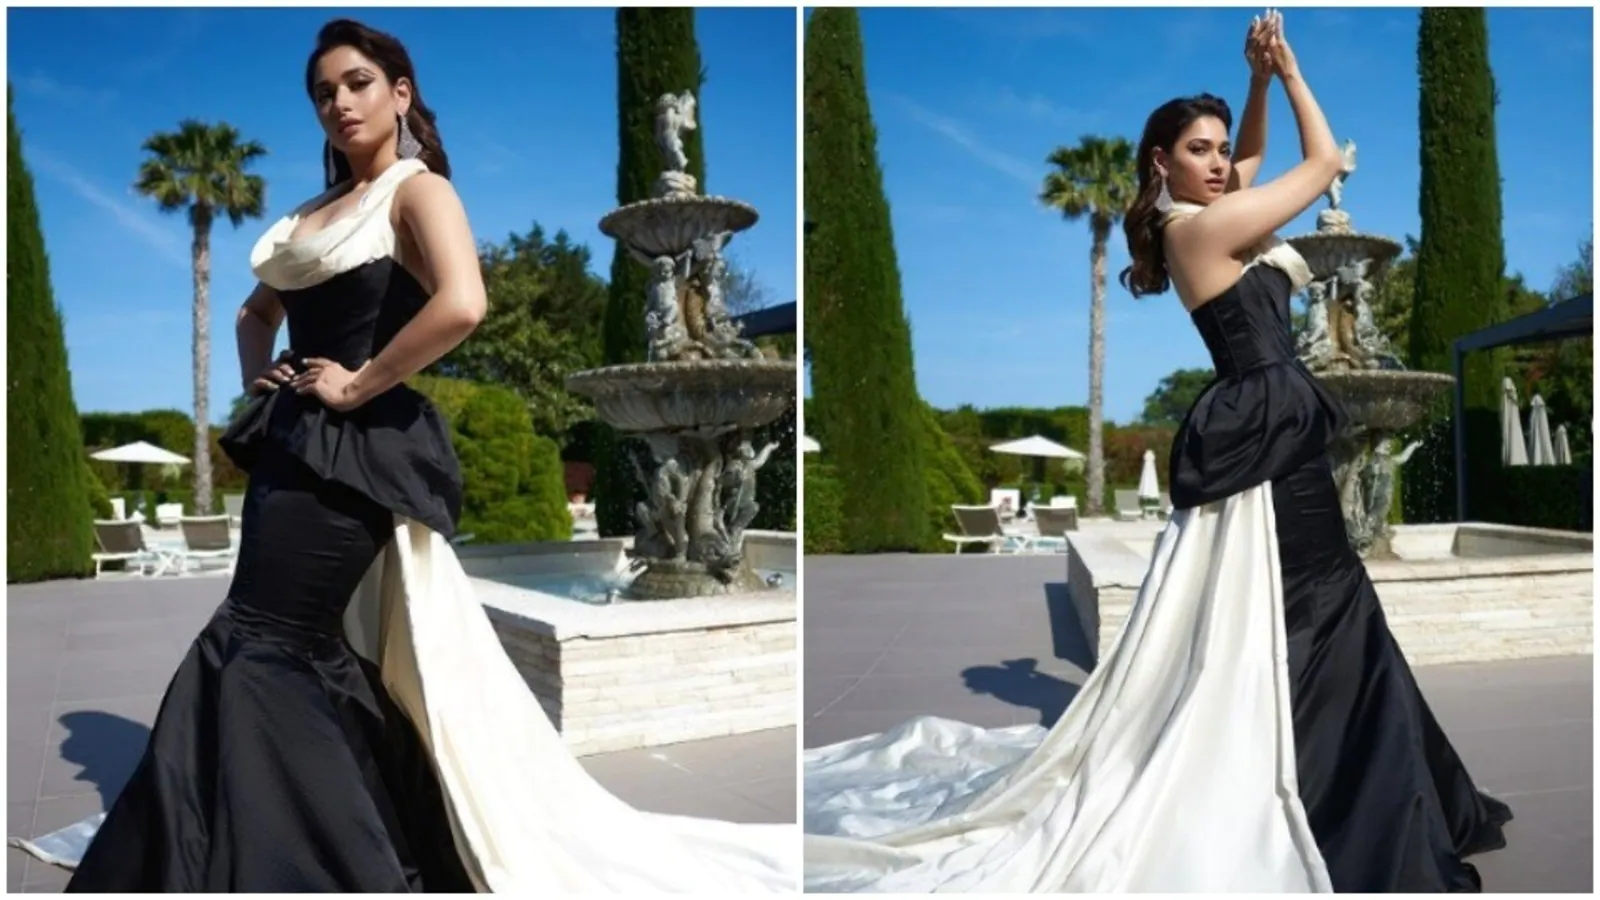 Cannes 2022: Tamannaah Bhatia is the modern-day Cinderella in a monochrome gown